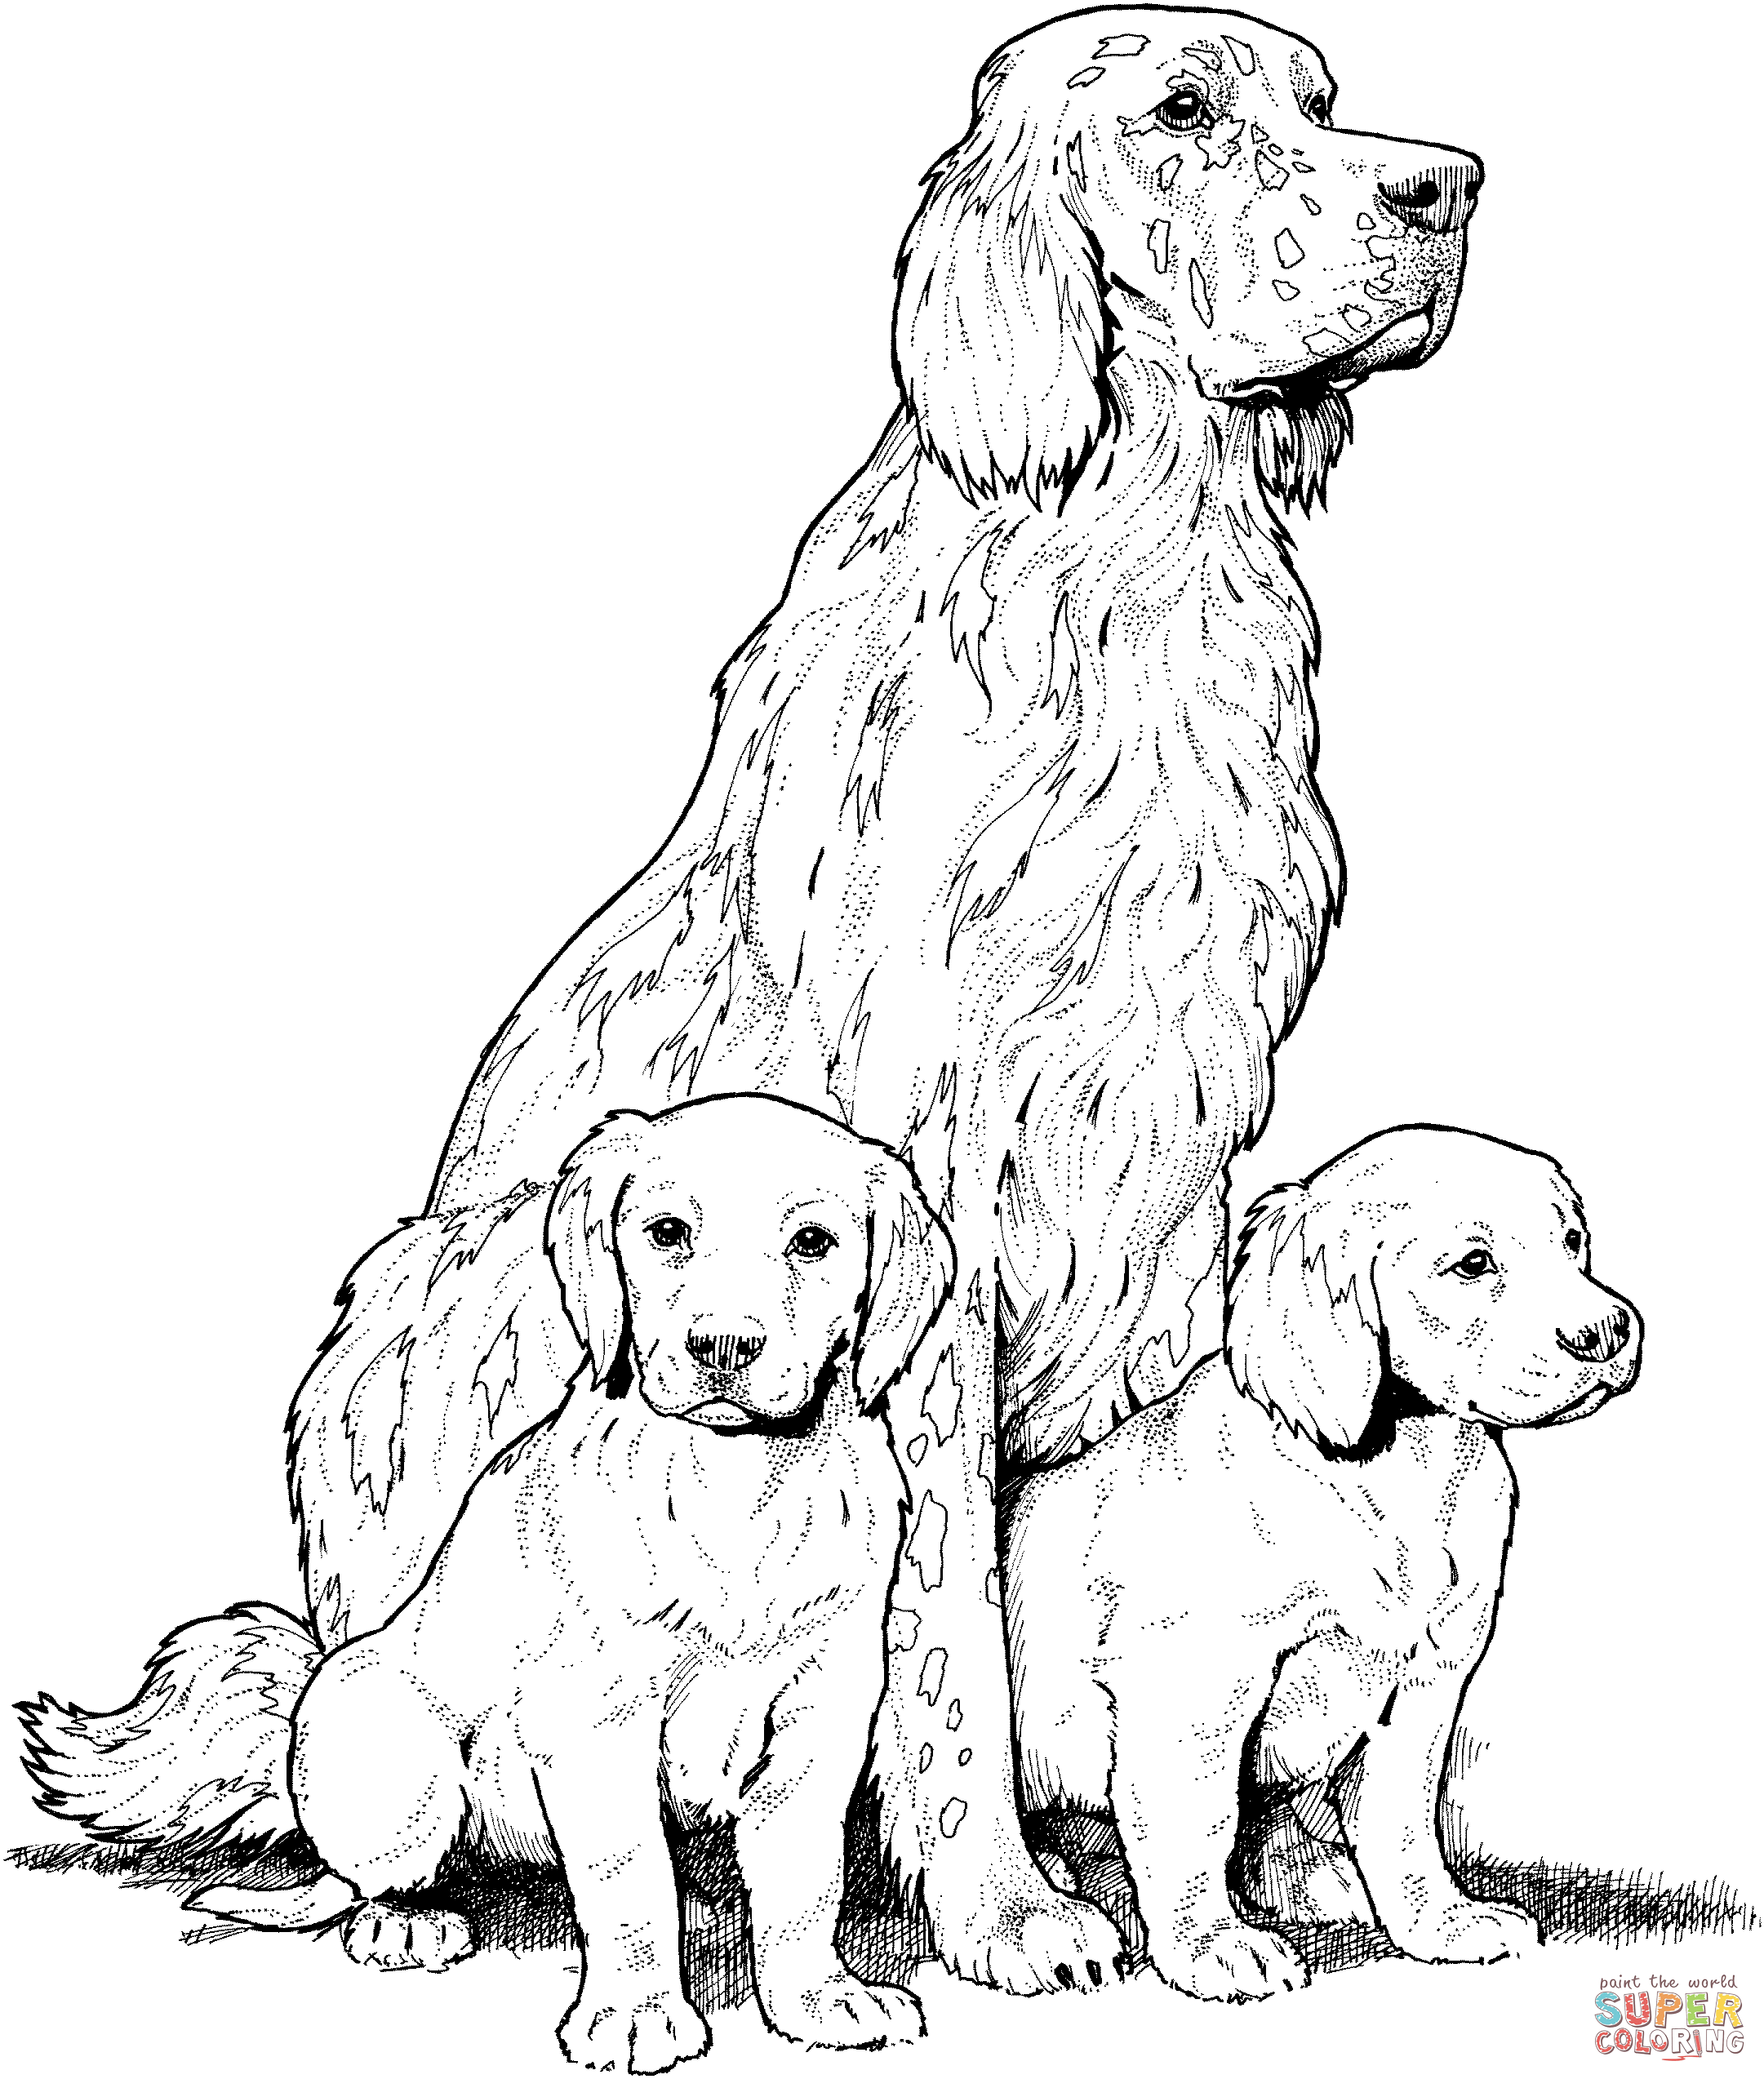 Dachshund With Puppies coloring page | Free Printable Coloring Pages